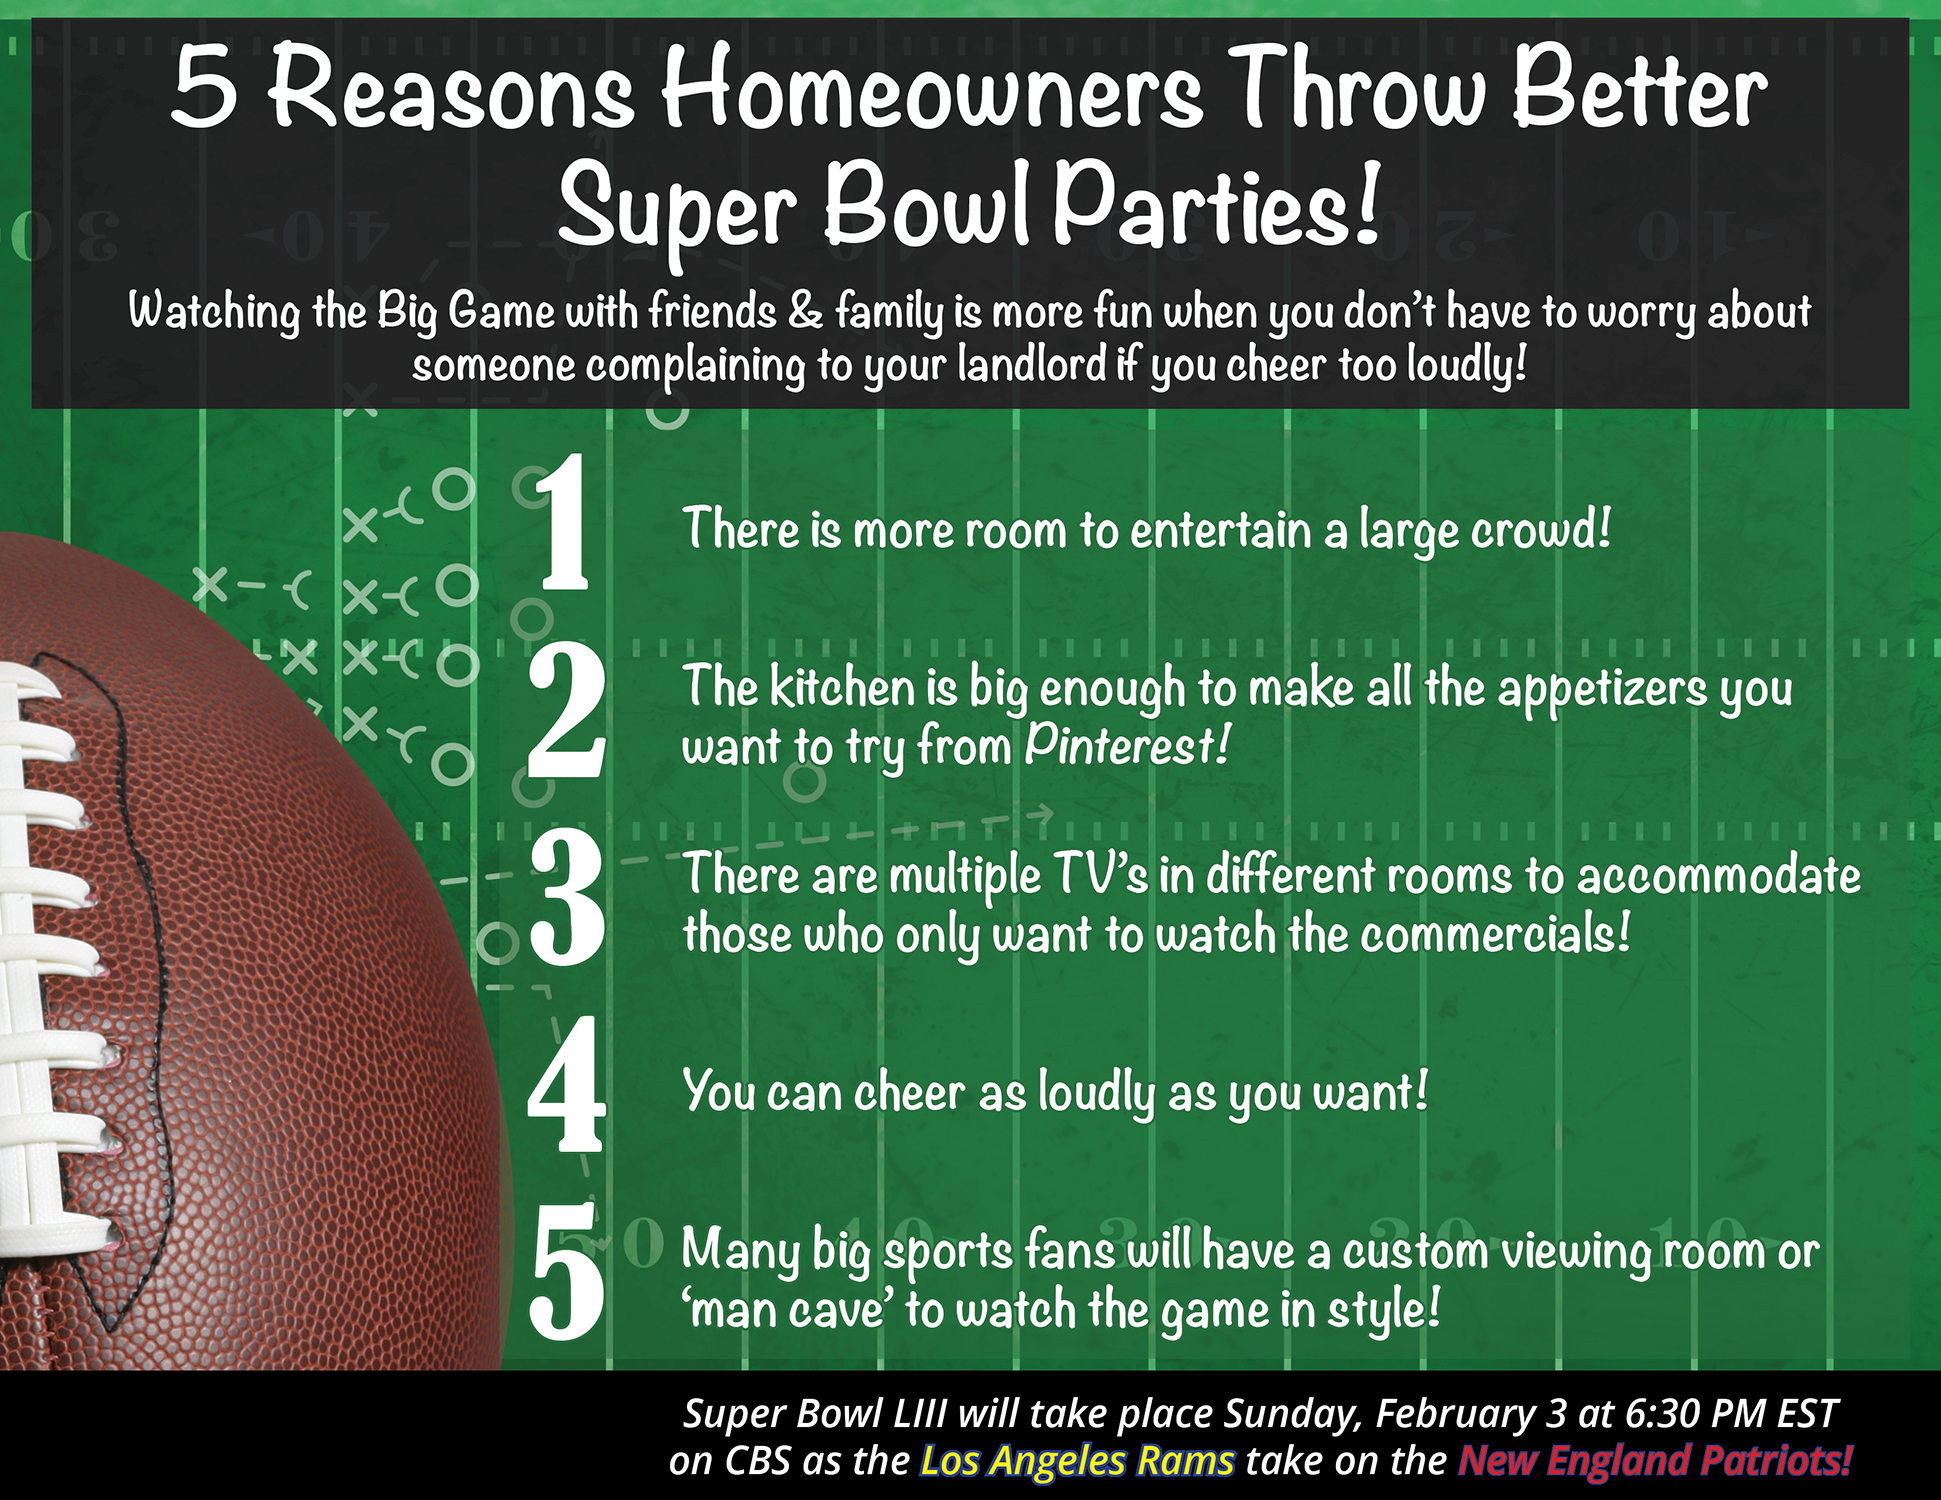 5 Reasons Homeowners Throw the Best Super Bowl Parties! [INFOGRAPHIC] | Simplifying The Market